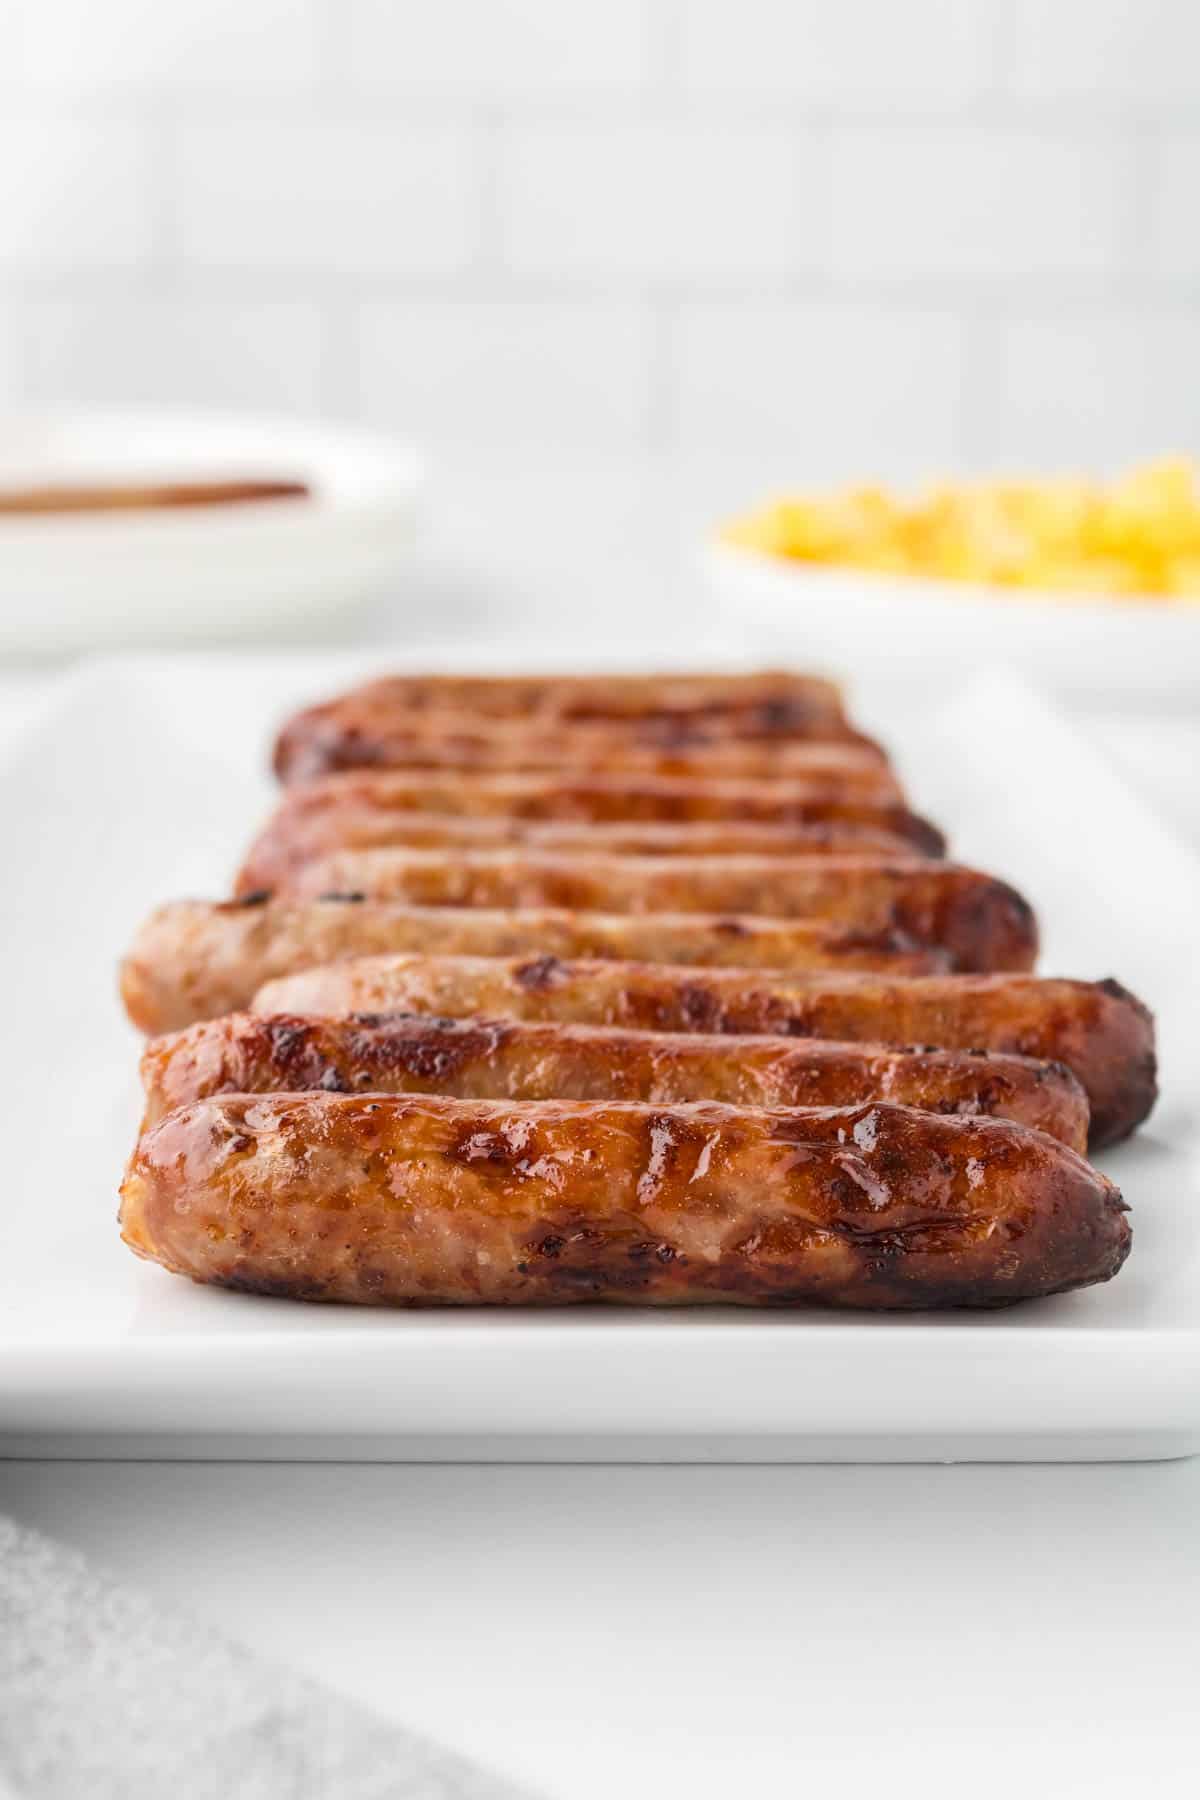 A plate full of cooked breakfast sausage links.